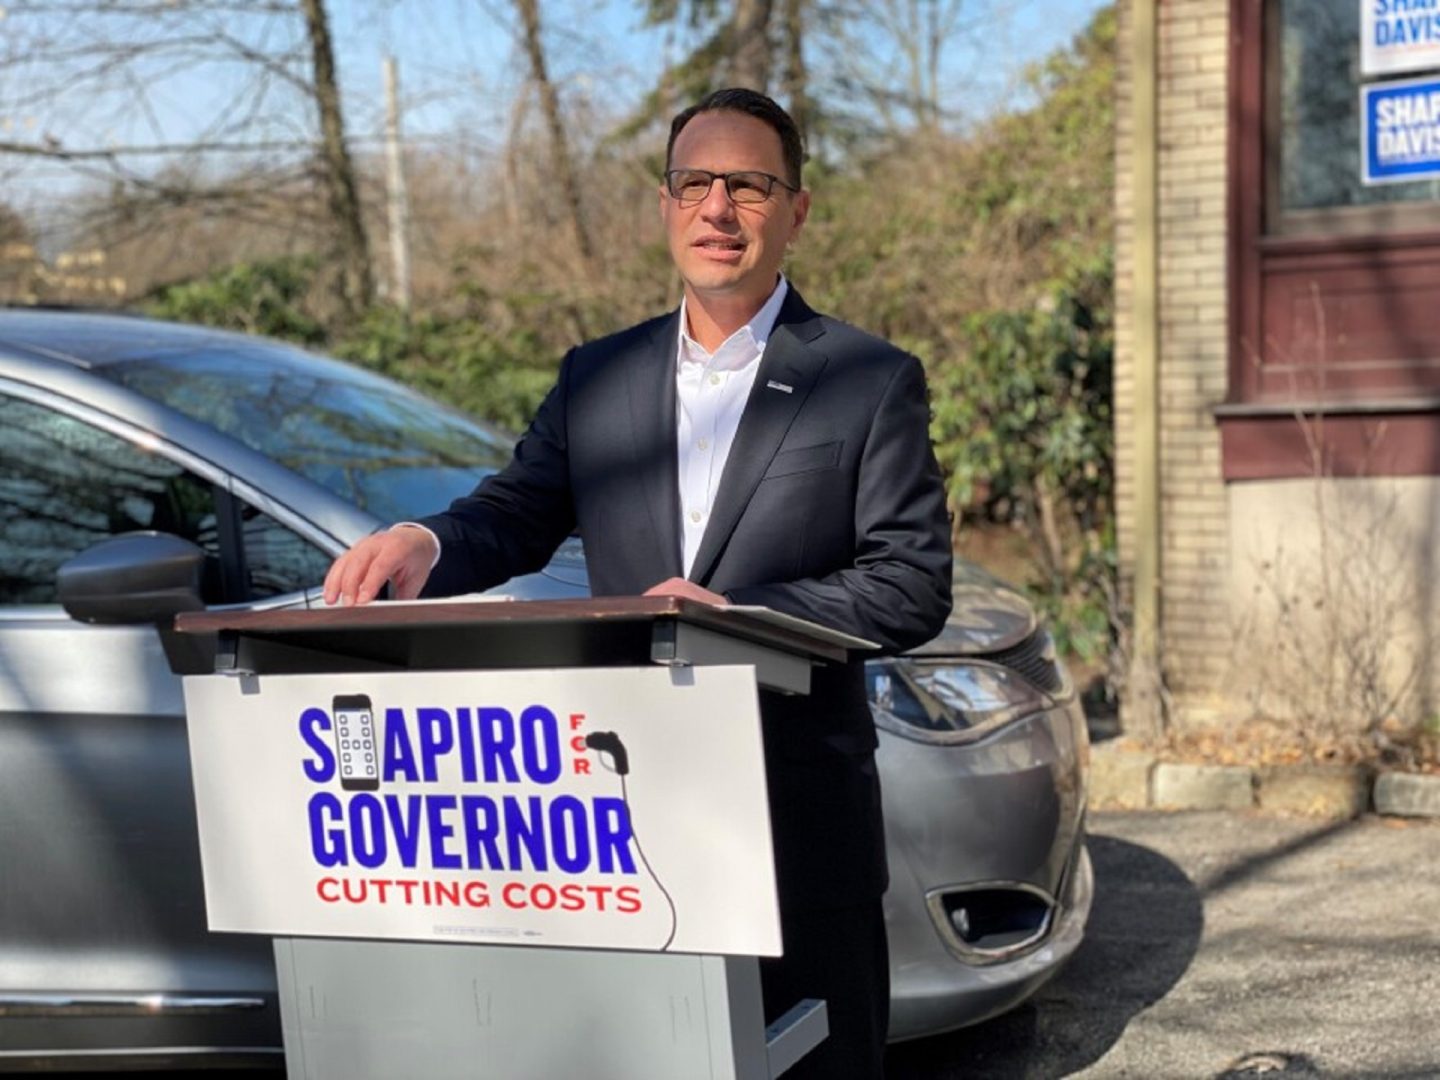 Pennsylvania Attorney General Josh Shapiro made a gubernatorial campaign stop at a home in Forest Hills, Allegheny County, on March 18, 2022.